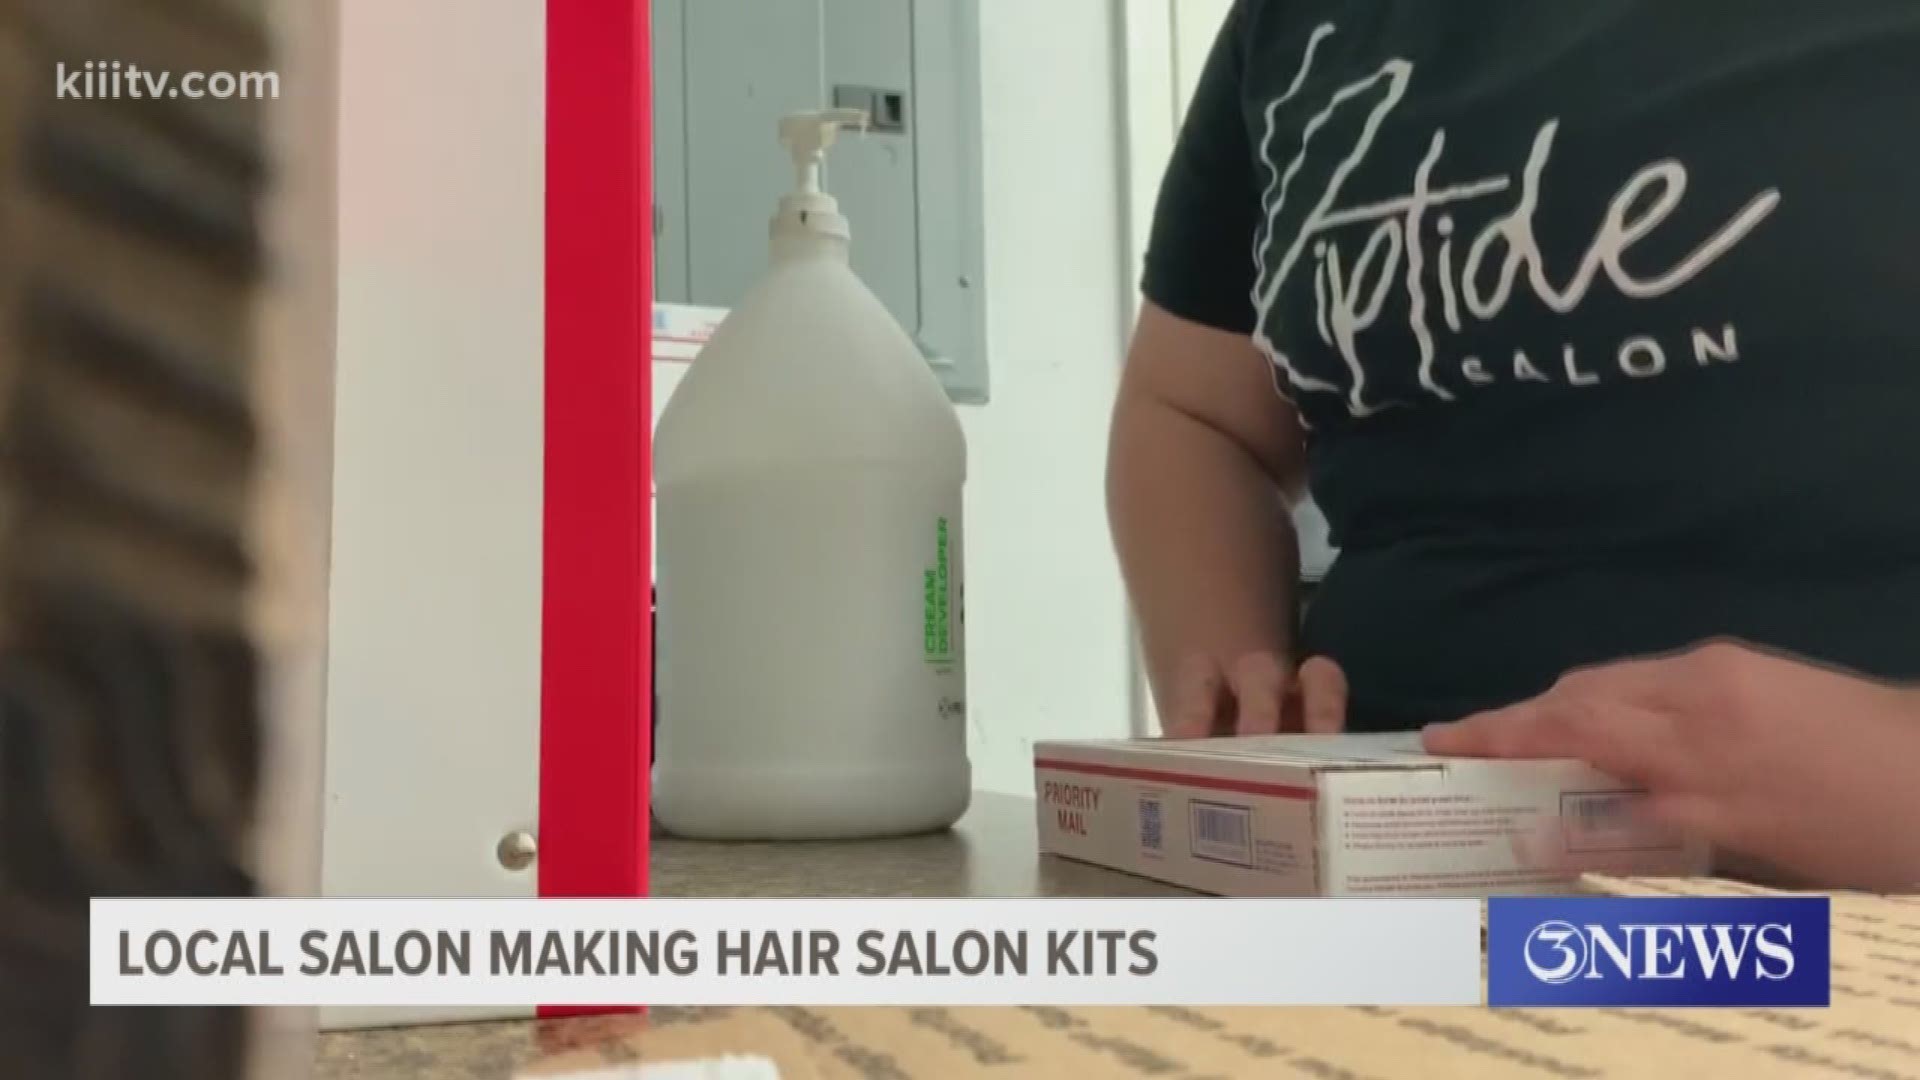 COVID-19 has impacted pretty much any job or occupation out there. One local hair salon owner is choosing to flip the script.